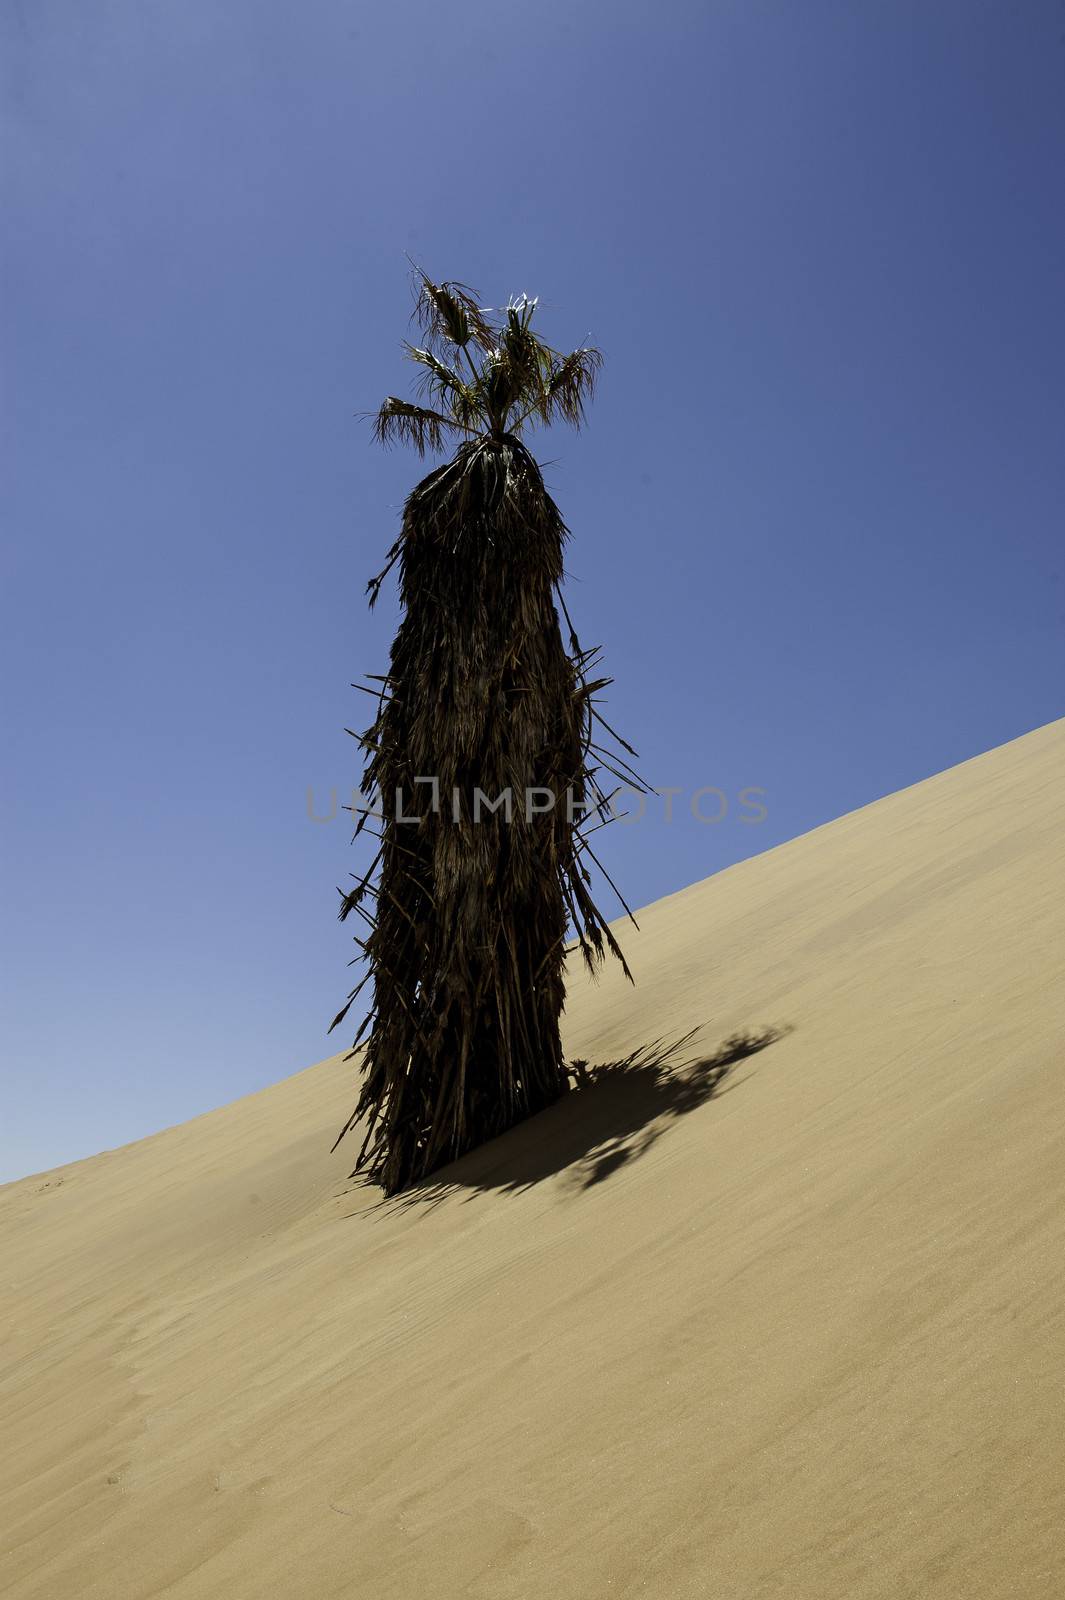 A palm tree in the Namib Desert.